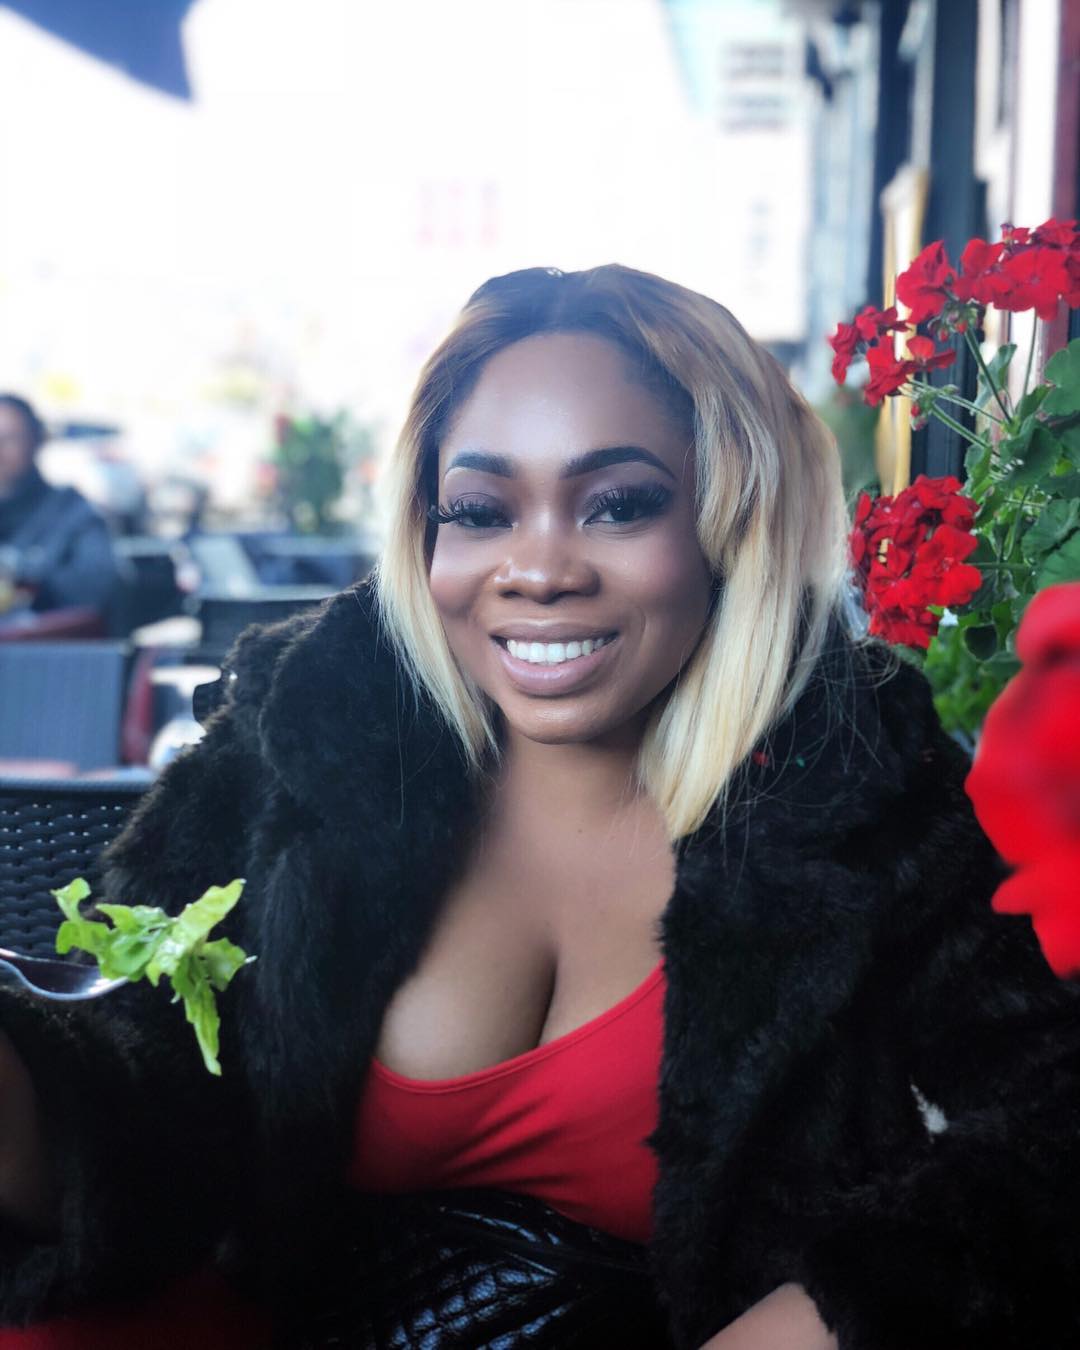 Moesha Boduong tours Europe, shares lovely photos from her trips